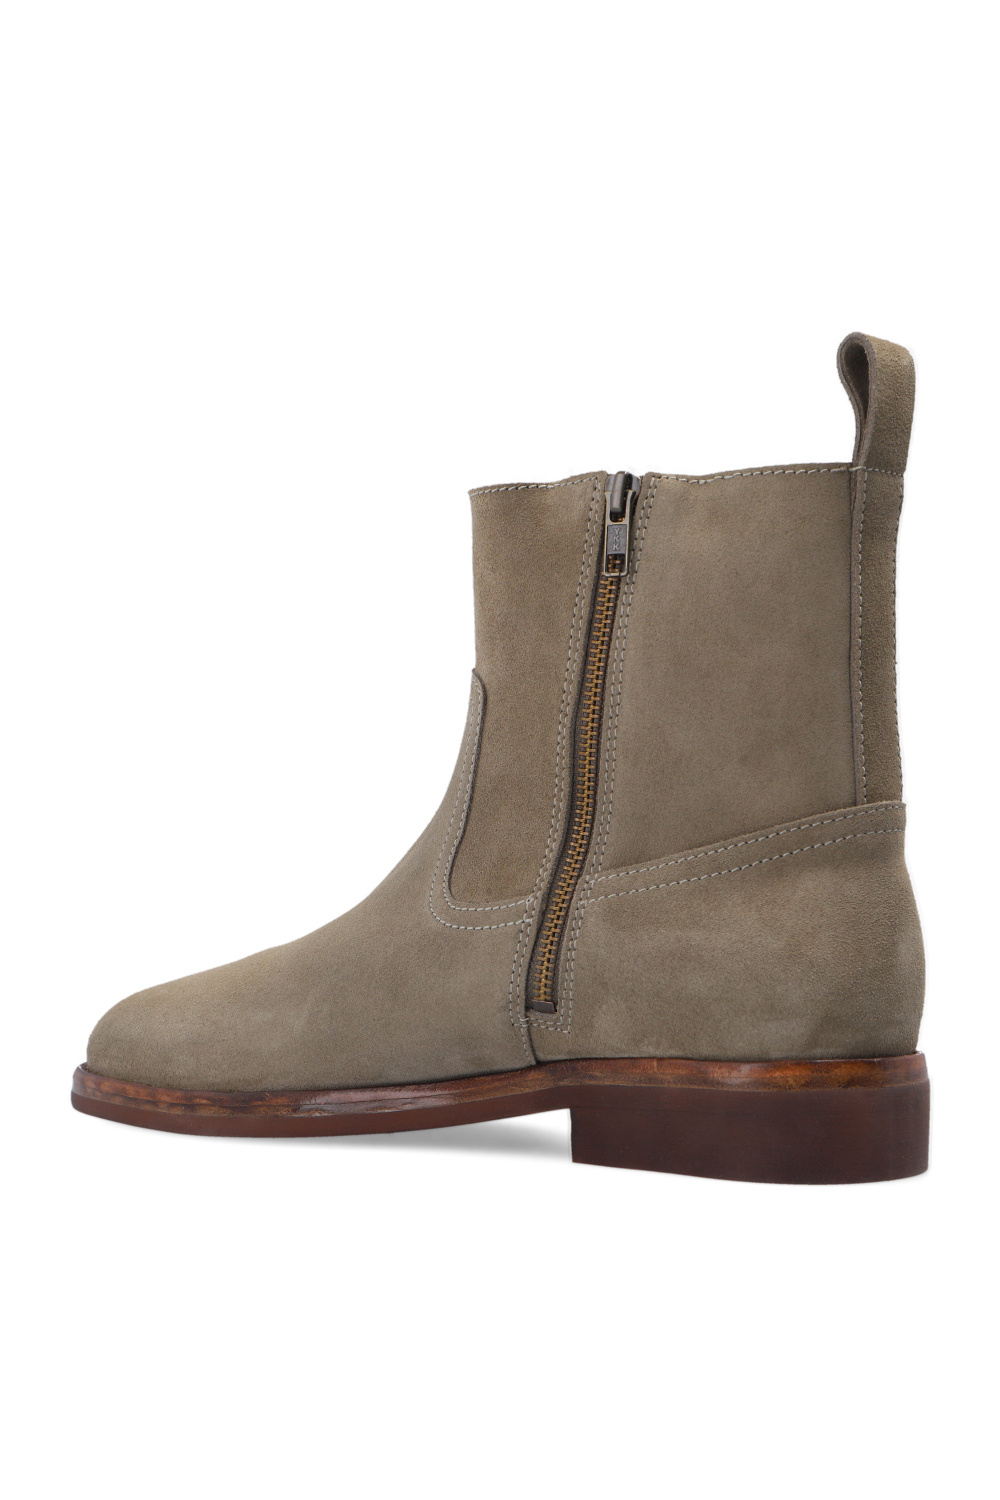 Isabel Marant ‘Darcus’ suede ankle boots